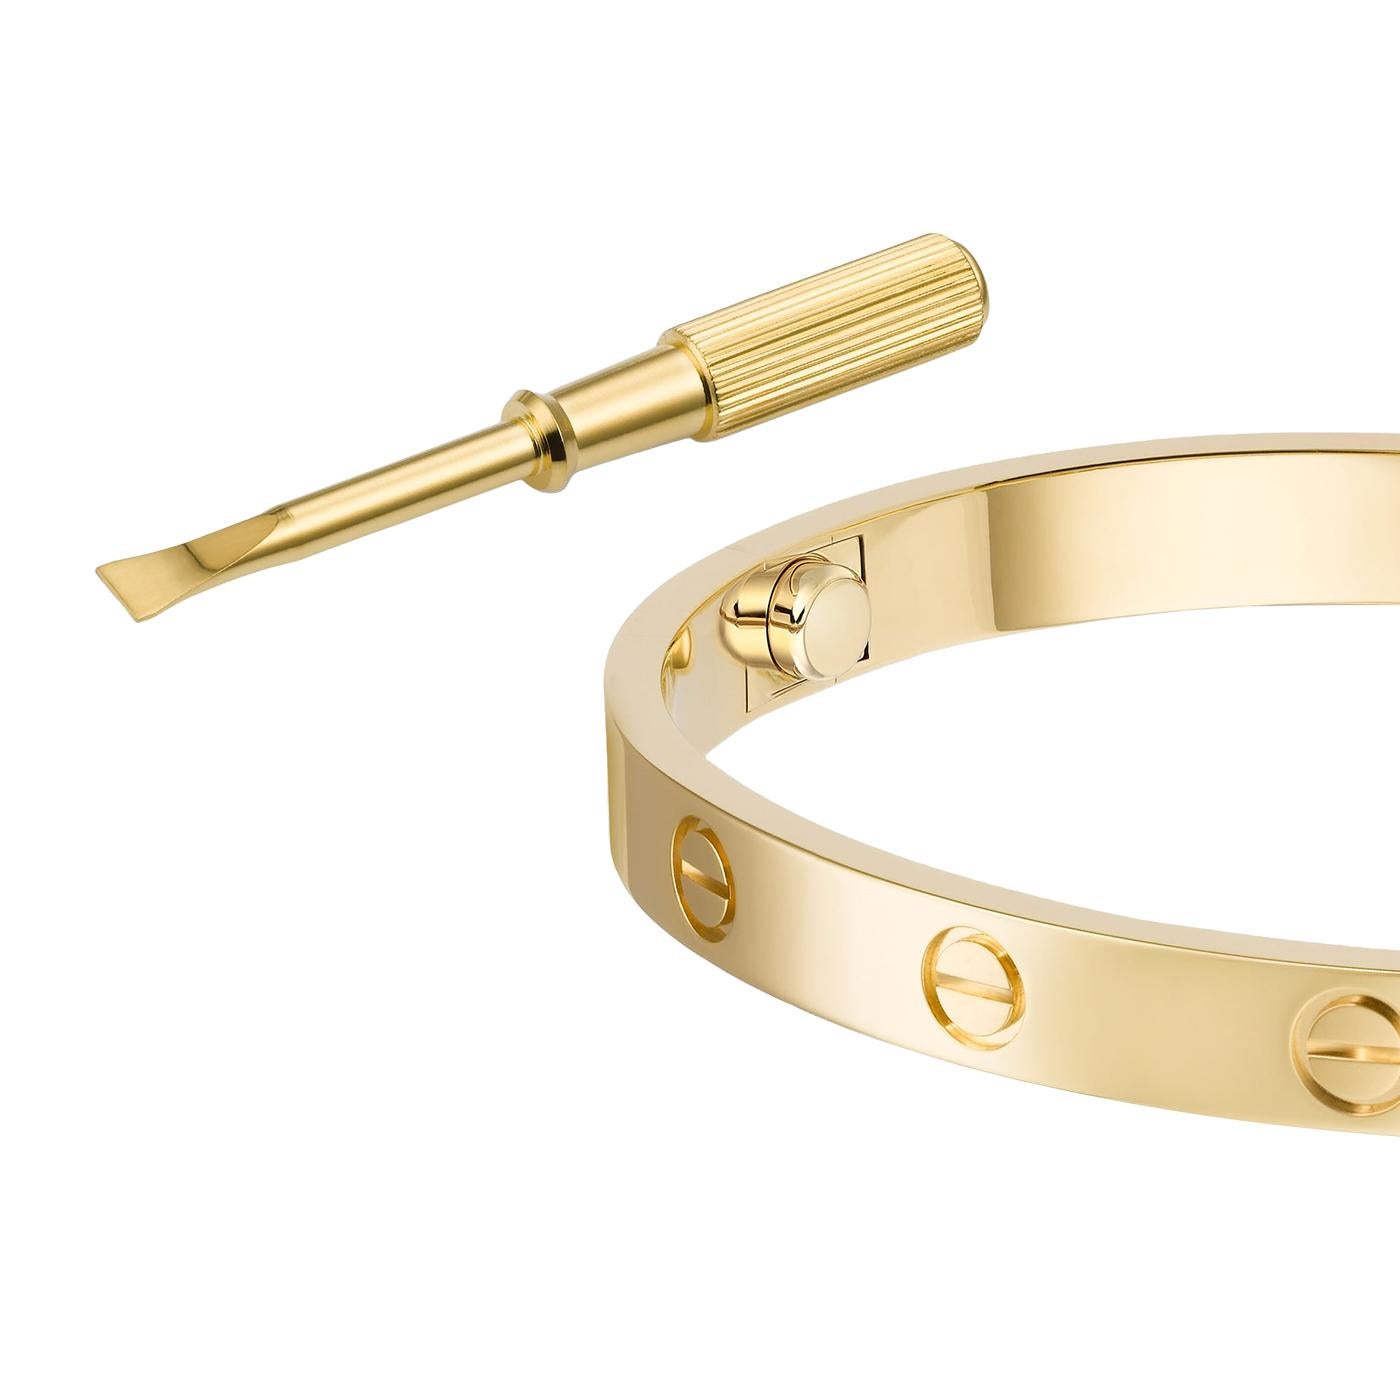 LOVE bracelet, 18K Yellow Gold (750/1000). Comes with a screwdriver. Width: 6.1 mm. Created in New York in 1969, the LOVE bracelet is an icon of jewelry design: a close-fitting, oval bracelet composed of two rigid arcs that is worn on the wrist and